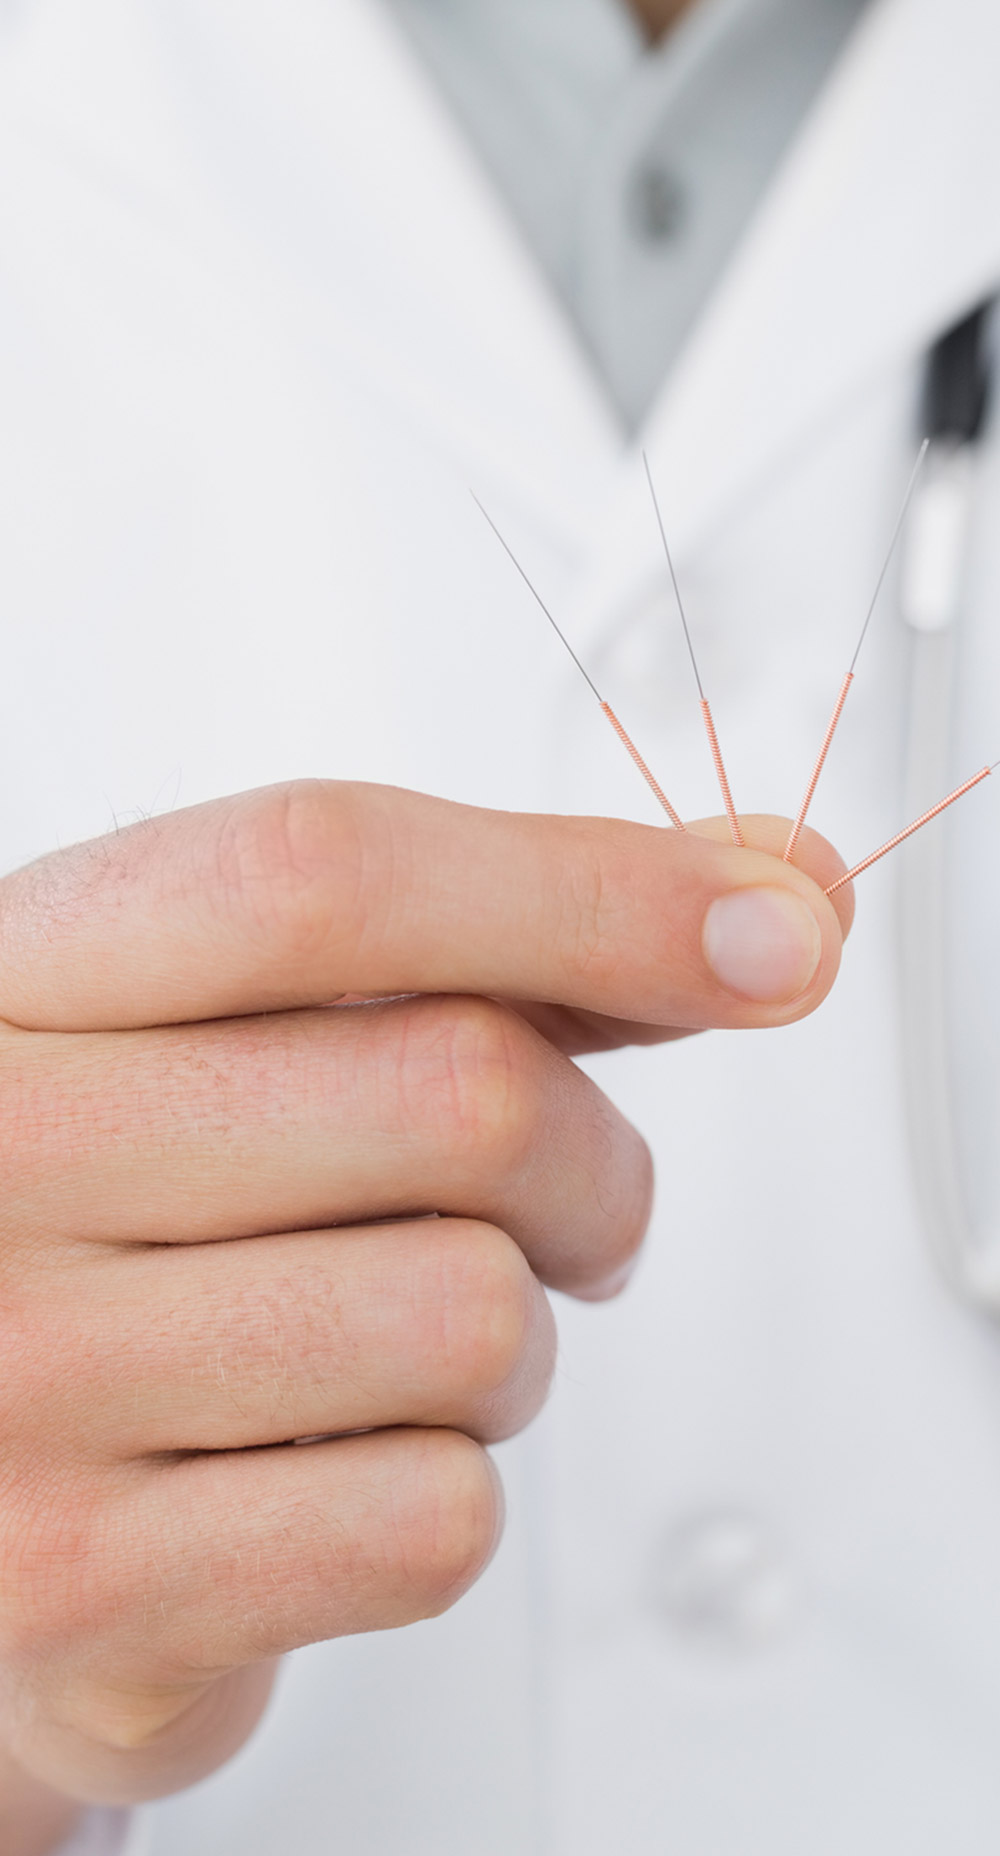 doctor of acupuncture holding acupuncture needles